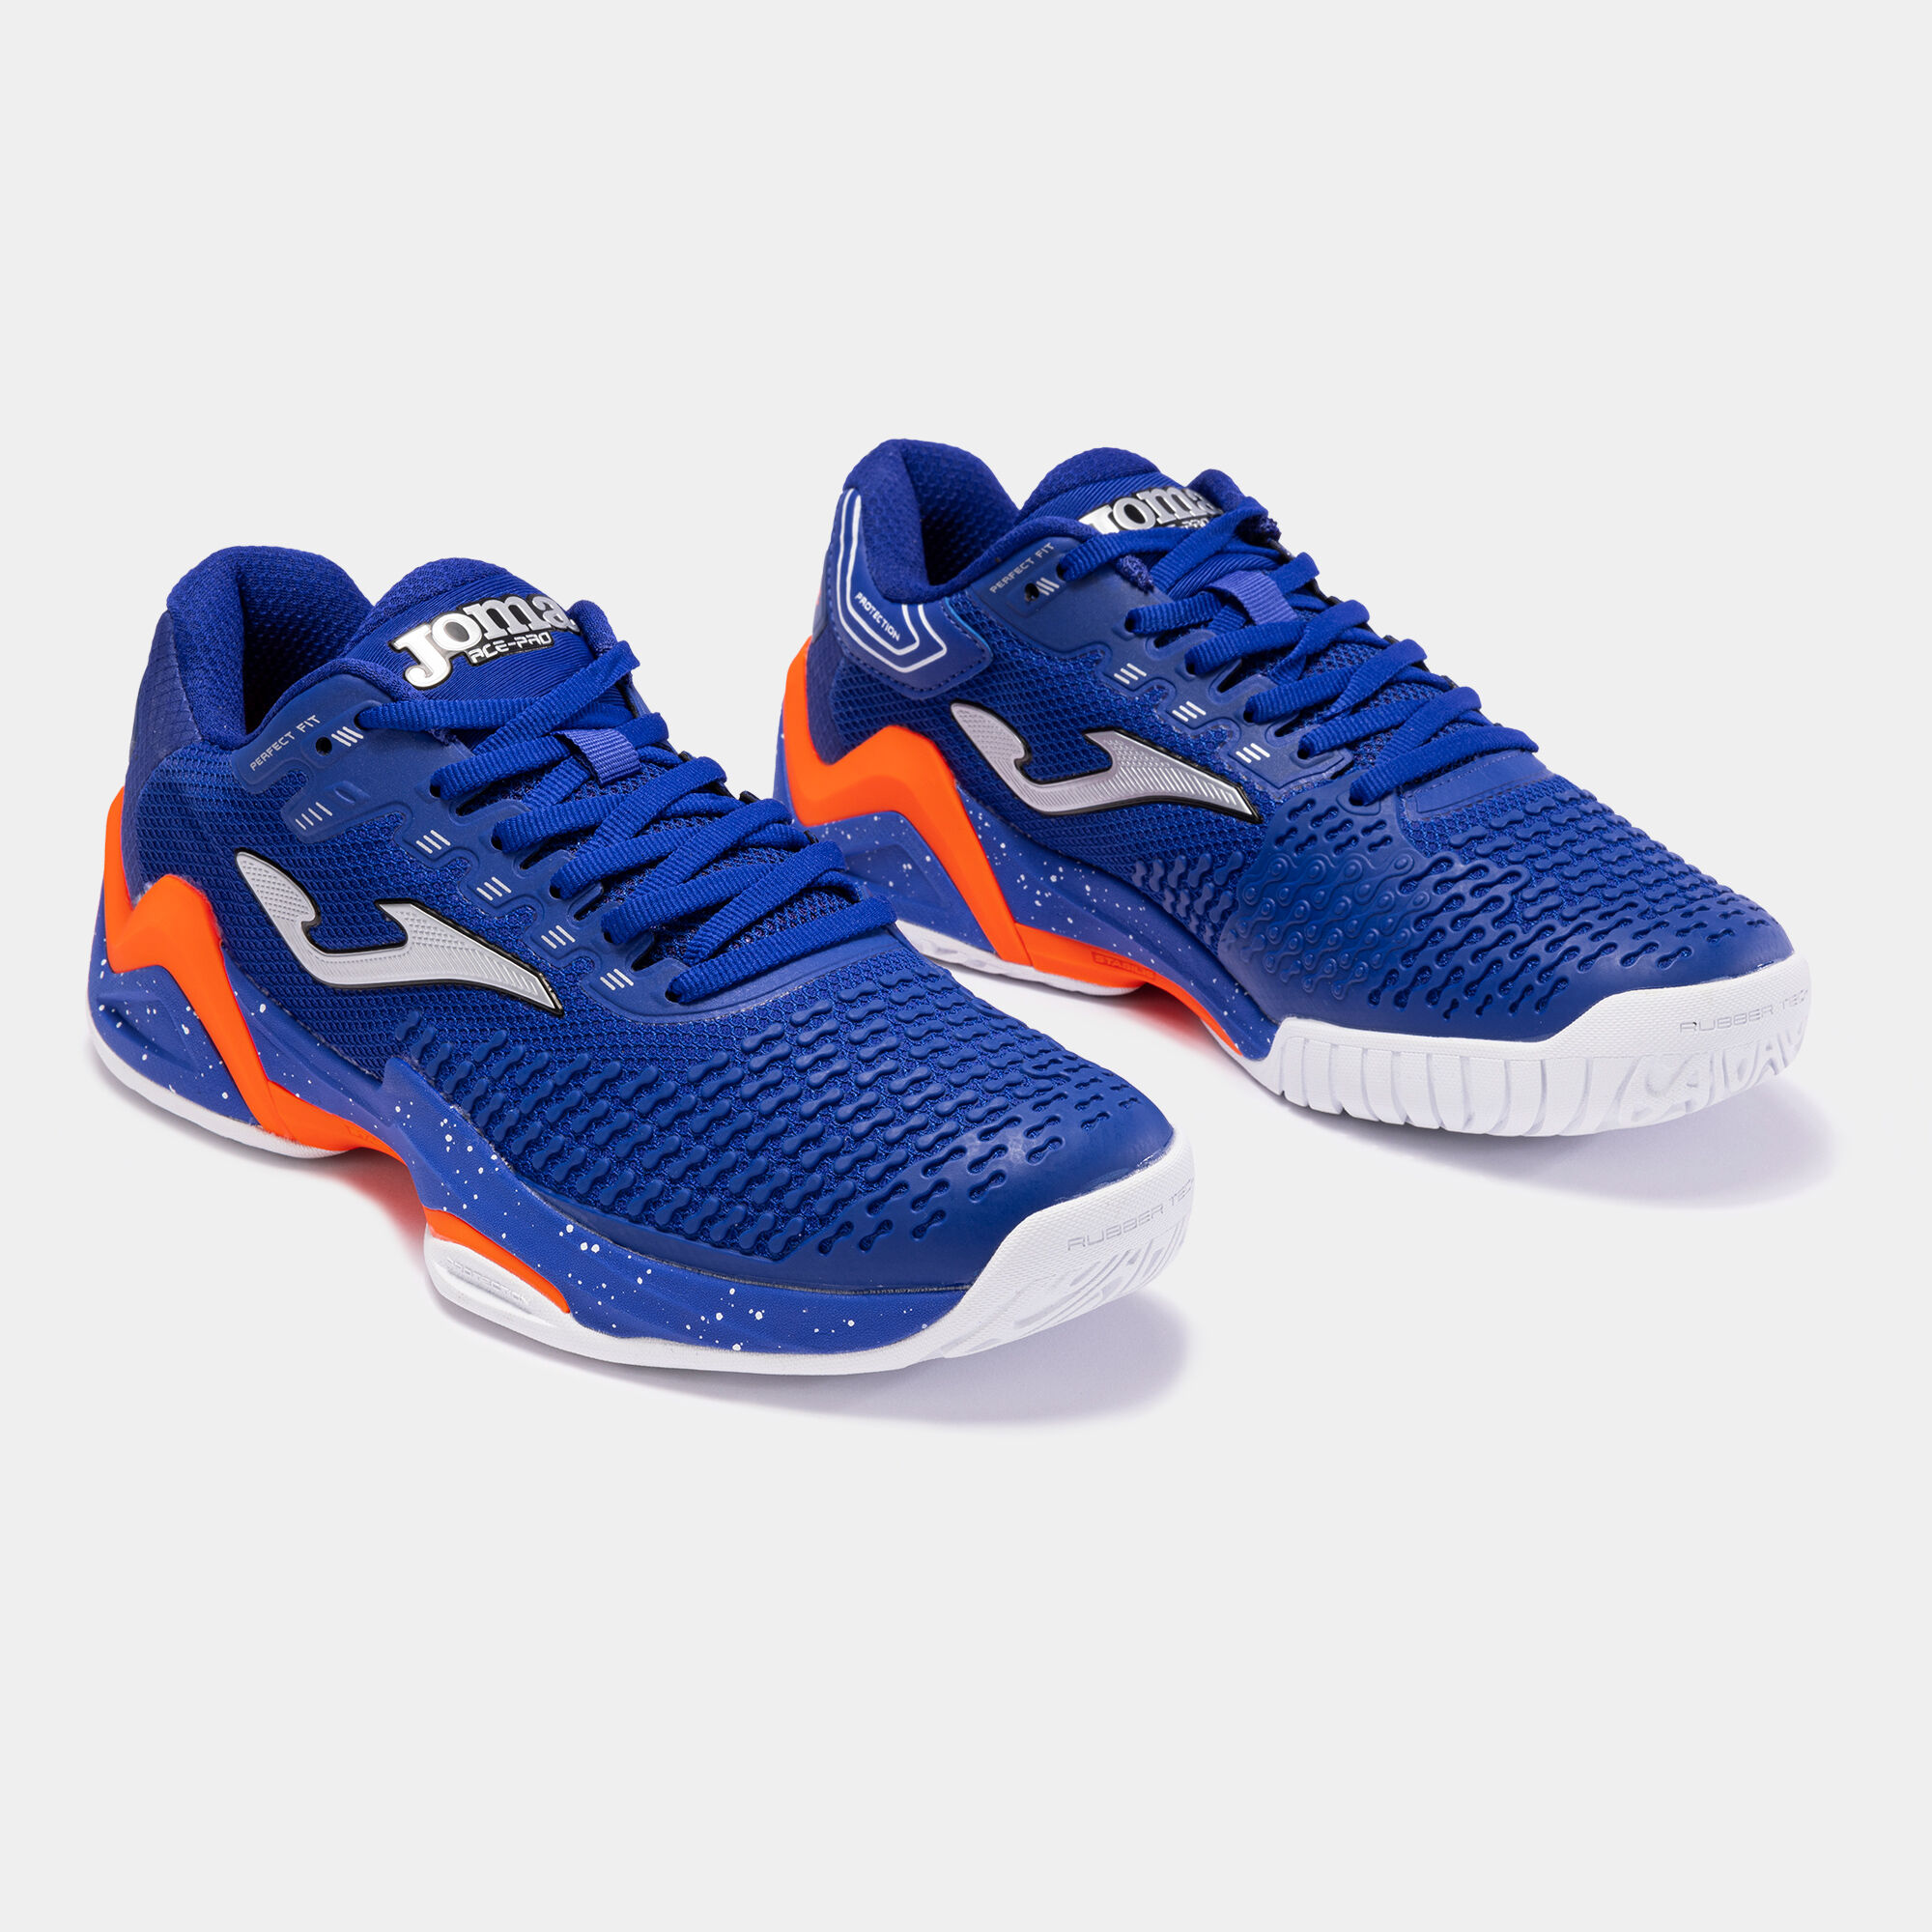 Shoes T.Ace 23 hard court man royal blue red